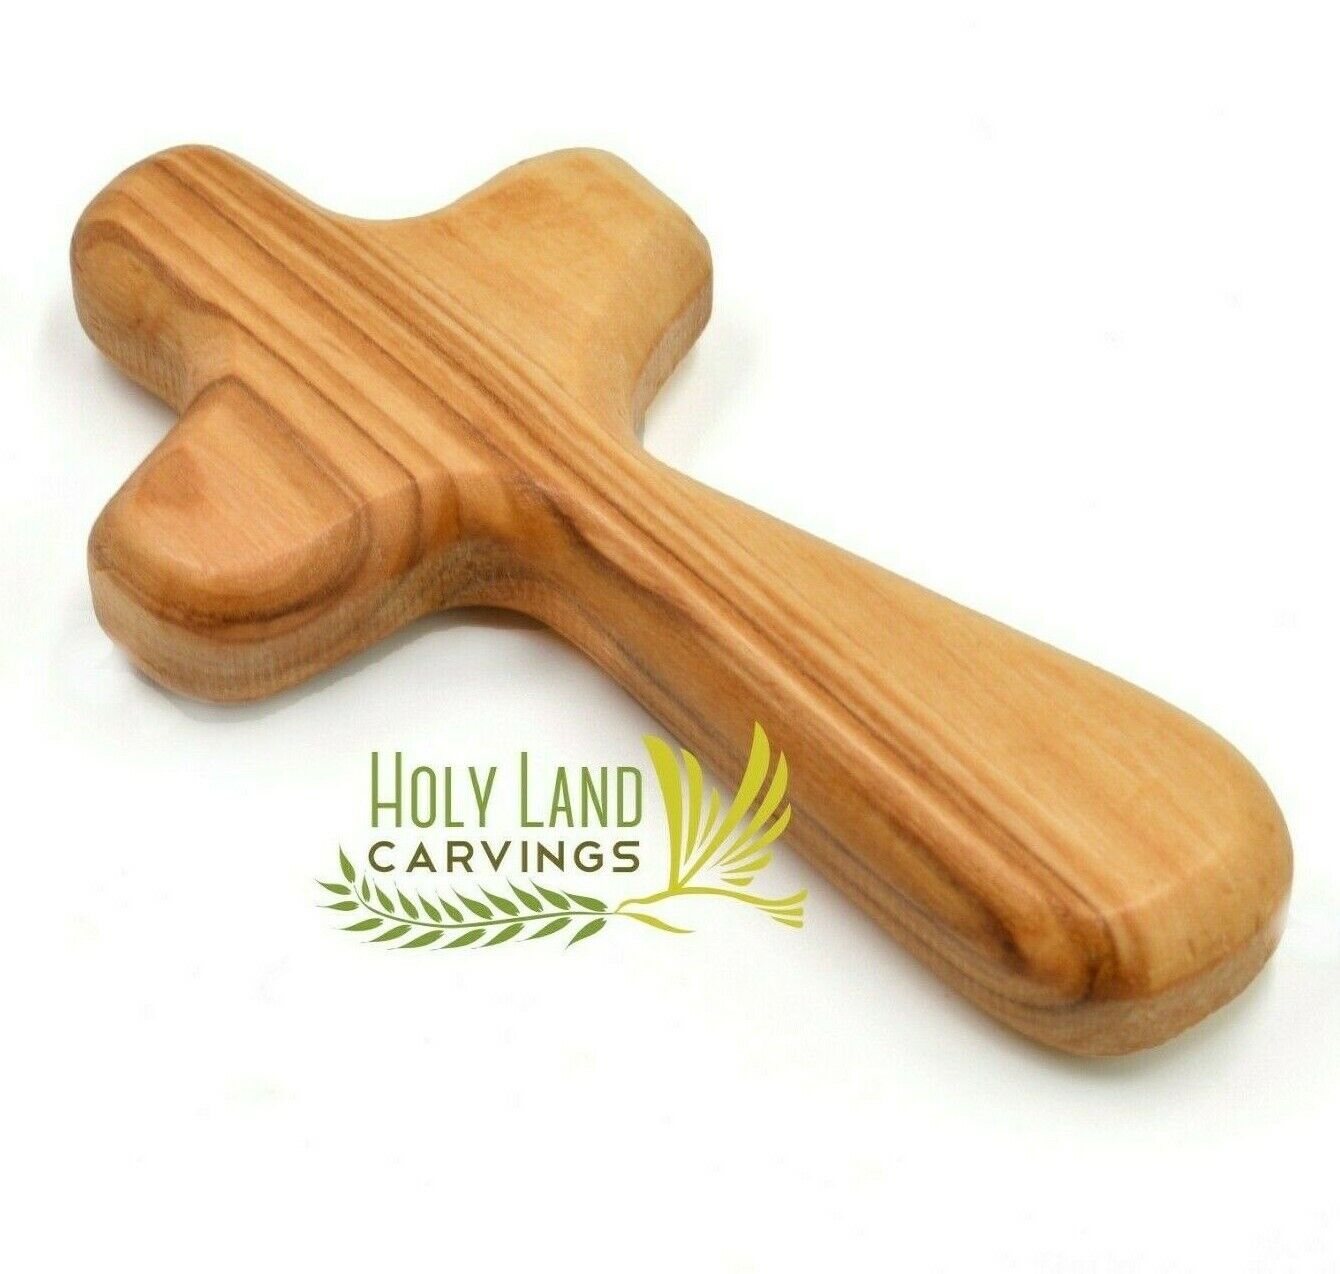 Olive Wood Handheld Comfort Cross Made in the Holy Land, Palm Holding Cross